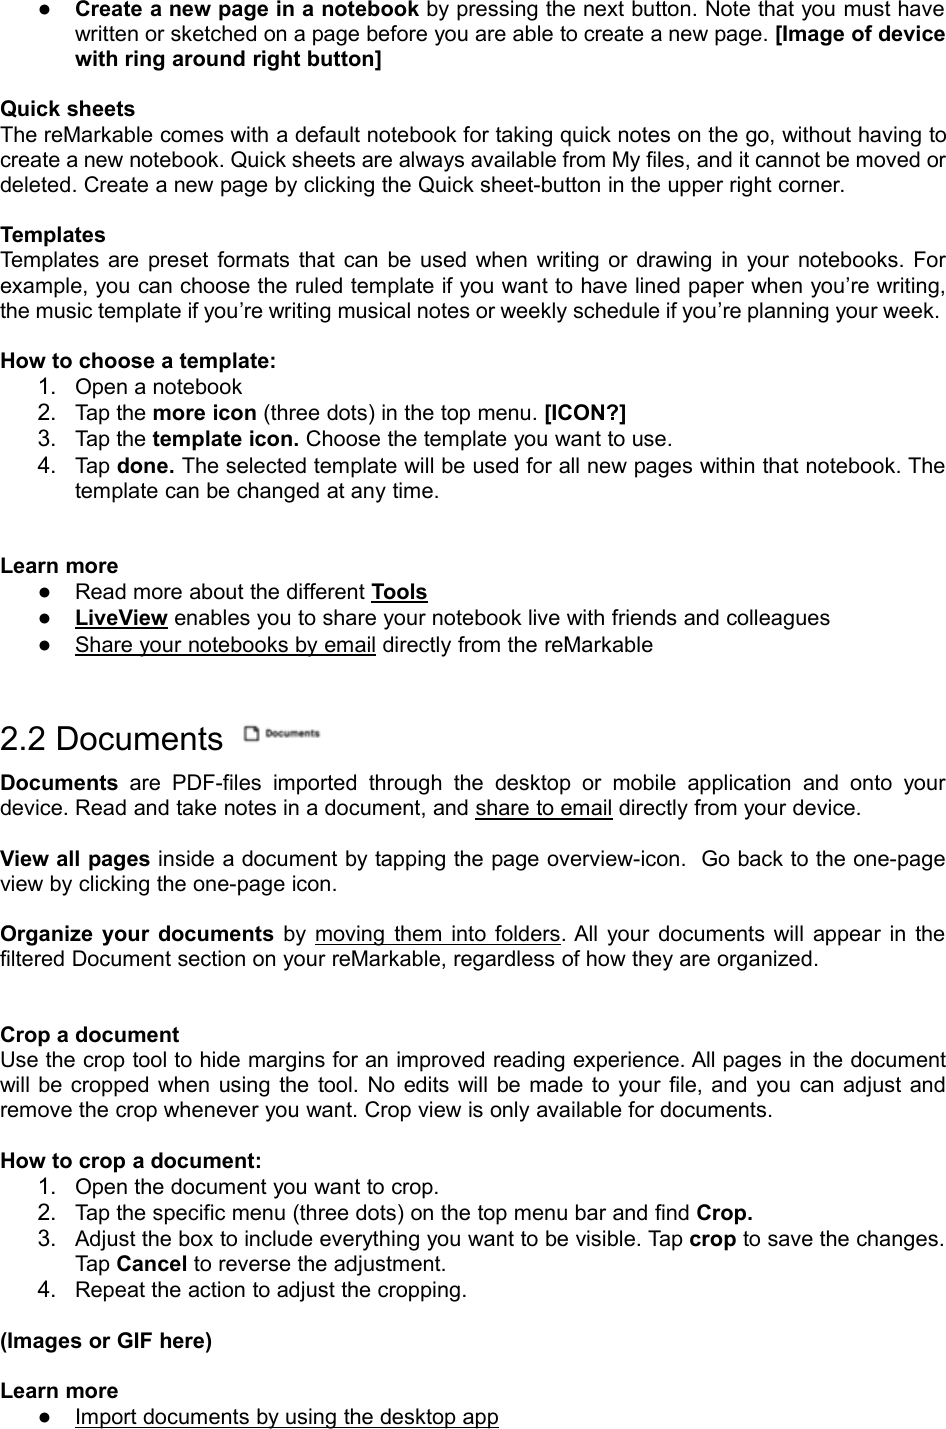 ●Create a new page in a notebook by pressing the next button. Note that you must havewritten or sketched on a page before you are able to create a new page. [Image of devicewith ring around right button]Quick sheetsThe reMarkable comes with a default notebook for taking quick notes on the go, without having tocreate a new notebook. Quick sheets are always available from My files, and it cannot be moved ordeleted. Create a new page by clicking the Quick sheet-button in the upper right corner.TemplatesTemplates are preset formats that can be used when writing or drawing in your notebooks. Forexample, you can choose the ruled template if you want to have lined paper when you’re writing,the music template if you’re writing musical notes or weekly schedule if you’re planning your week.How to choose a template:1. Open a notebook2. Tap the more icon (three dots) in the top menu. [ICON?]3. Tap the template icon. Choose the template you want to use.4. Tap done. The selected template will be used for all new pages within that notebook. Thetemplate can be changed at any time.Learn more●Read more about the different Tools●LiveView enables you to share your notebook live with friends and colleagues●Share your notebooks by email directly from the reMarkable2.2 DocumentsDocuments are PDF-files imported through the desktop or mobile application and onto yourdevice. Read and take notes in a document, and share to email directly from your device.View all pages inside a document by tapping the page overview-icon. Go back to the one-pageview by clicking the one-page icon.Organize your documents by moving them into folders. All your documents will appear in thefiltered Document section on your reMarkable, regardless of how they are organized.Crop a documentUse the crop tool to hide margins for an improved reading experience. All pages in the documentwill be cropped when using the tool. No edits will be made to your file, and you can adjust andremove the crop whenever you want. Crop view is only available for documents.How to crop a document:1. Open the document you want to crop.2. Tap the specific menu (three dots) on the top menu bar and find Crop.3. Adjust the box to include everything you want to be visible. Tap crop to save the changes.Tap Cancel to reverse the adjustment.4. Repeat the action to adjust the cropping.(Images or GIF here)Learn more●Import documents by using the desktop app